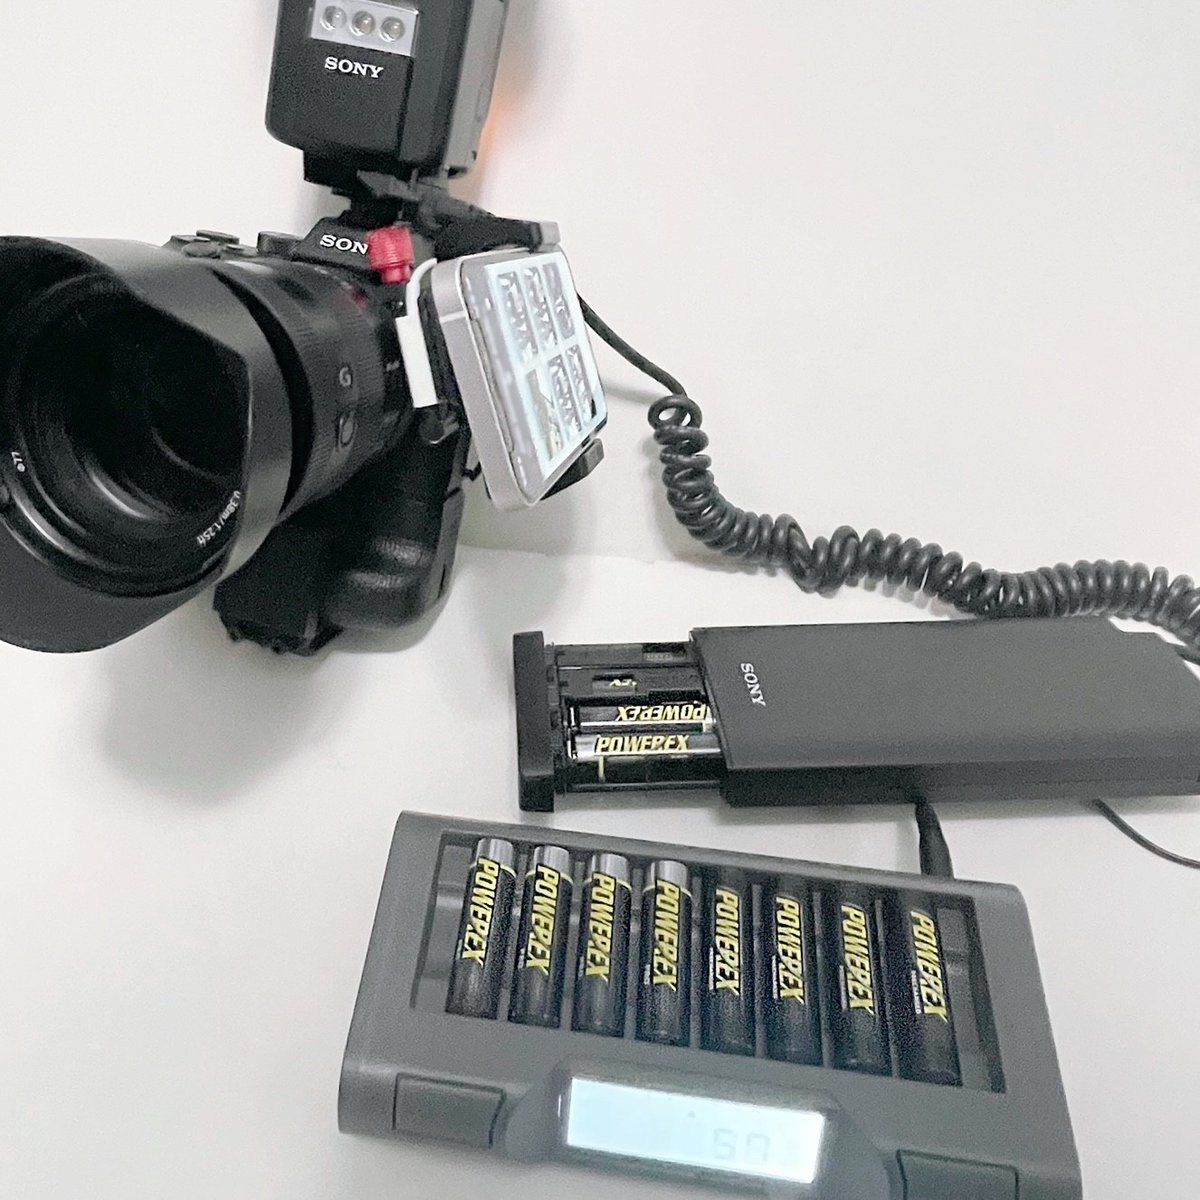 .@jeffreypix using the MH-C940 to charge his Powerex batteries. Thanks for sharing Jeff! Amazon Sale: amazon.com/Powerex-MH-C94… -Repost @jeffreypix #Event #photographer READY! @mahaenergy #MH-C940 Battery Charger loaded with 8 #Powerex Pro 2700mah #rechargeable #batteries...